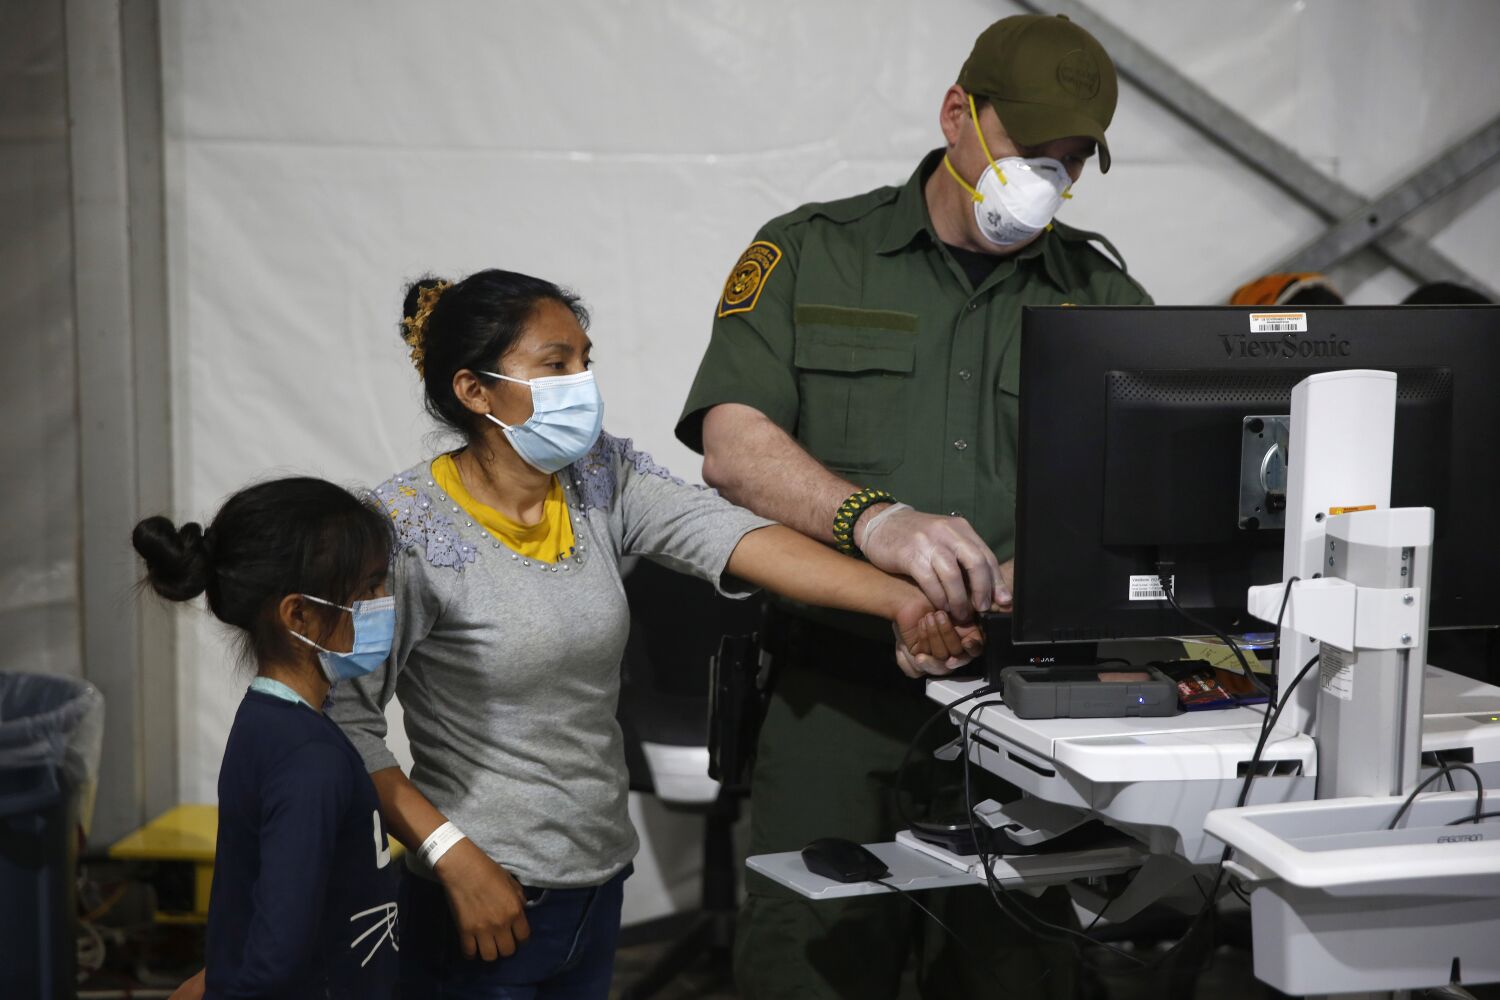 Internal report details rampant diarrhea among children at overcrowded border facility